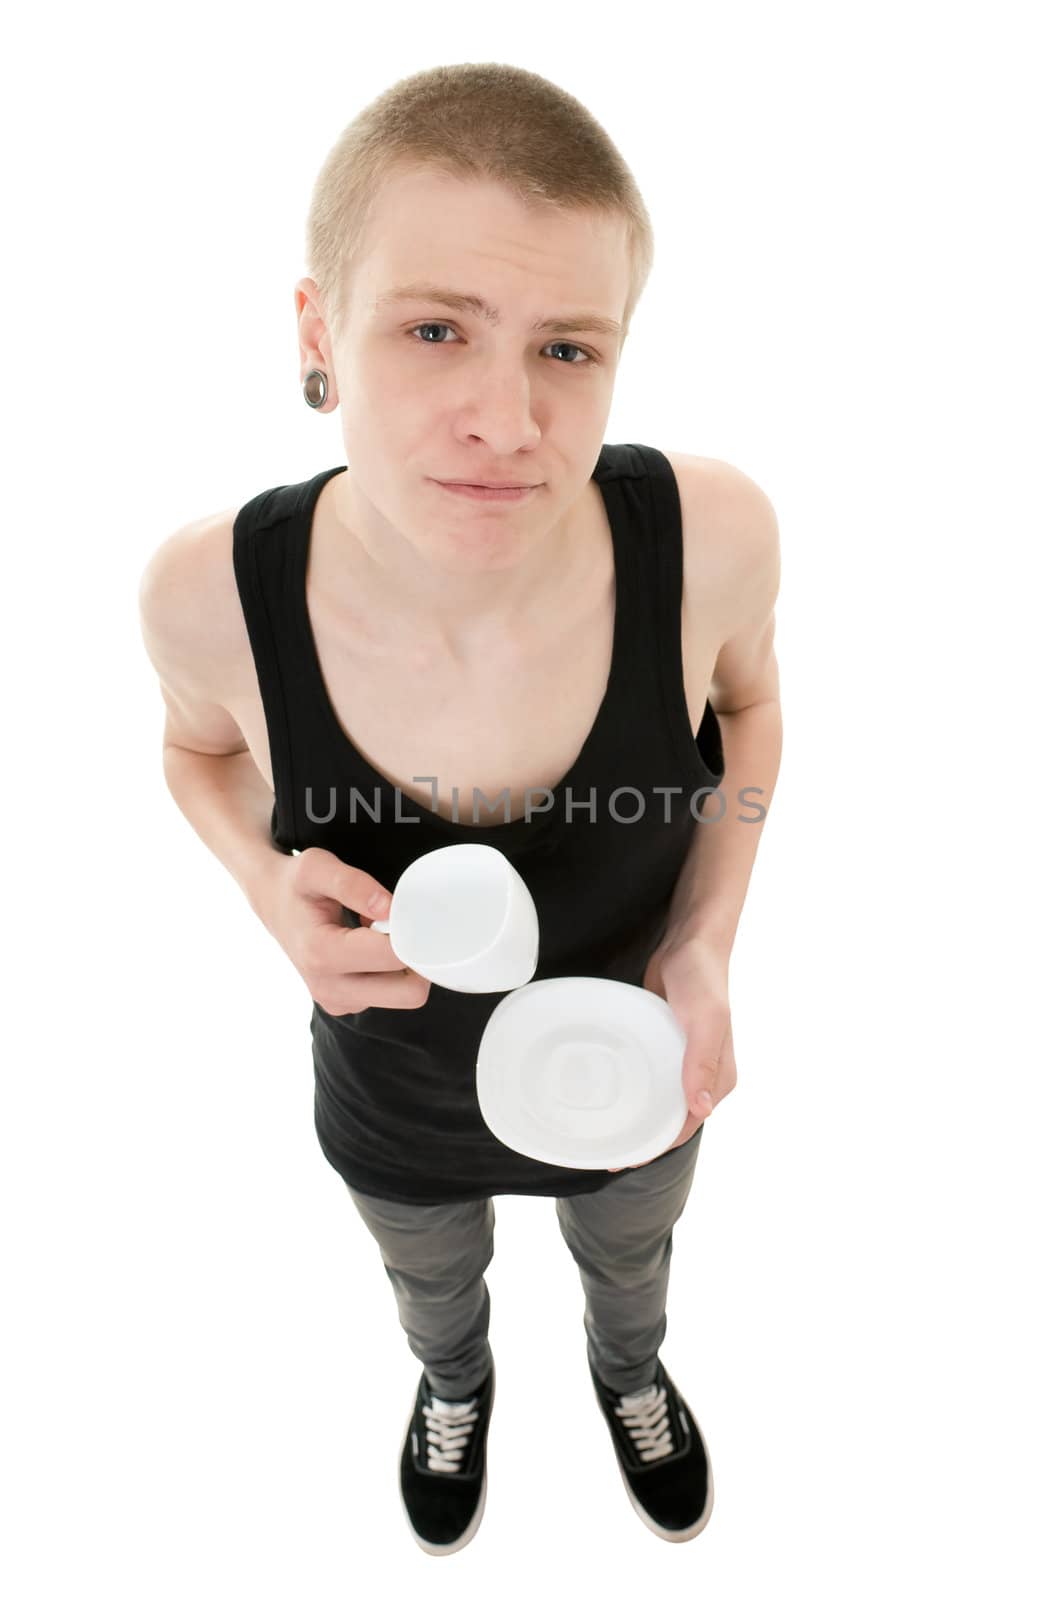 funny skinny teenager with a cup isolated on white background